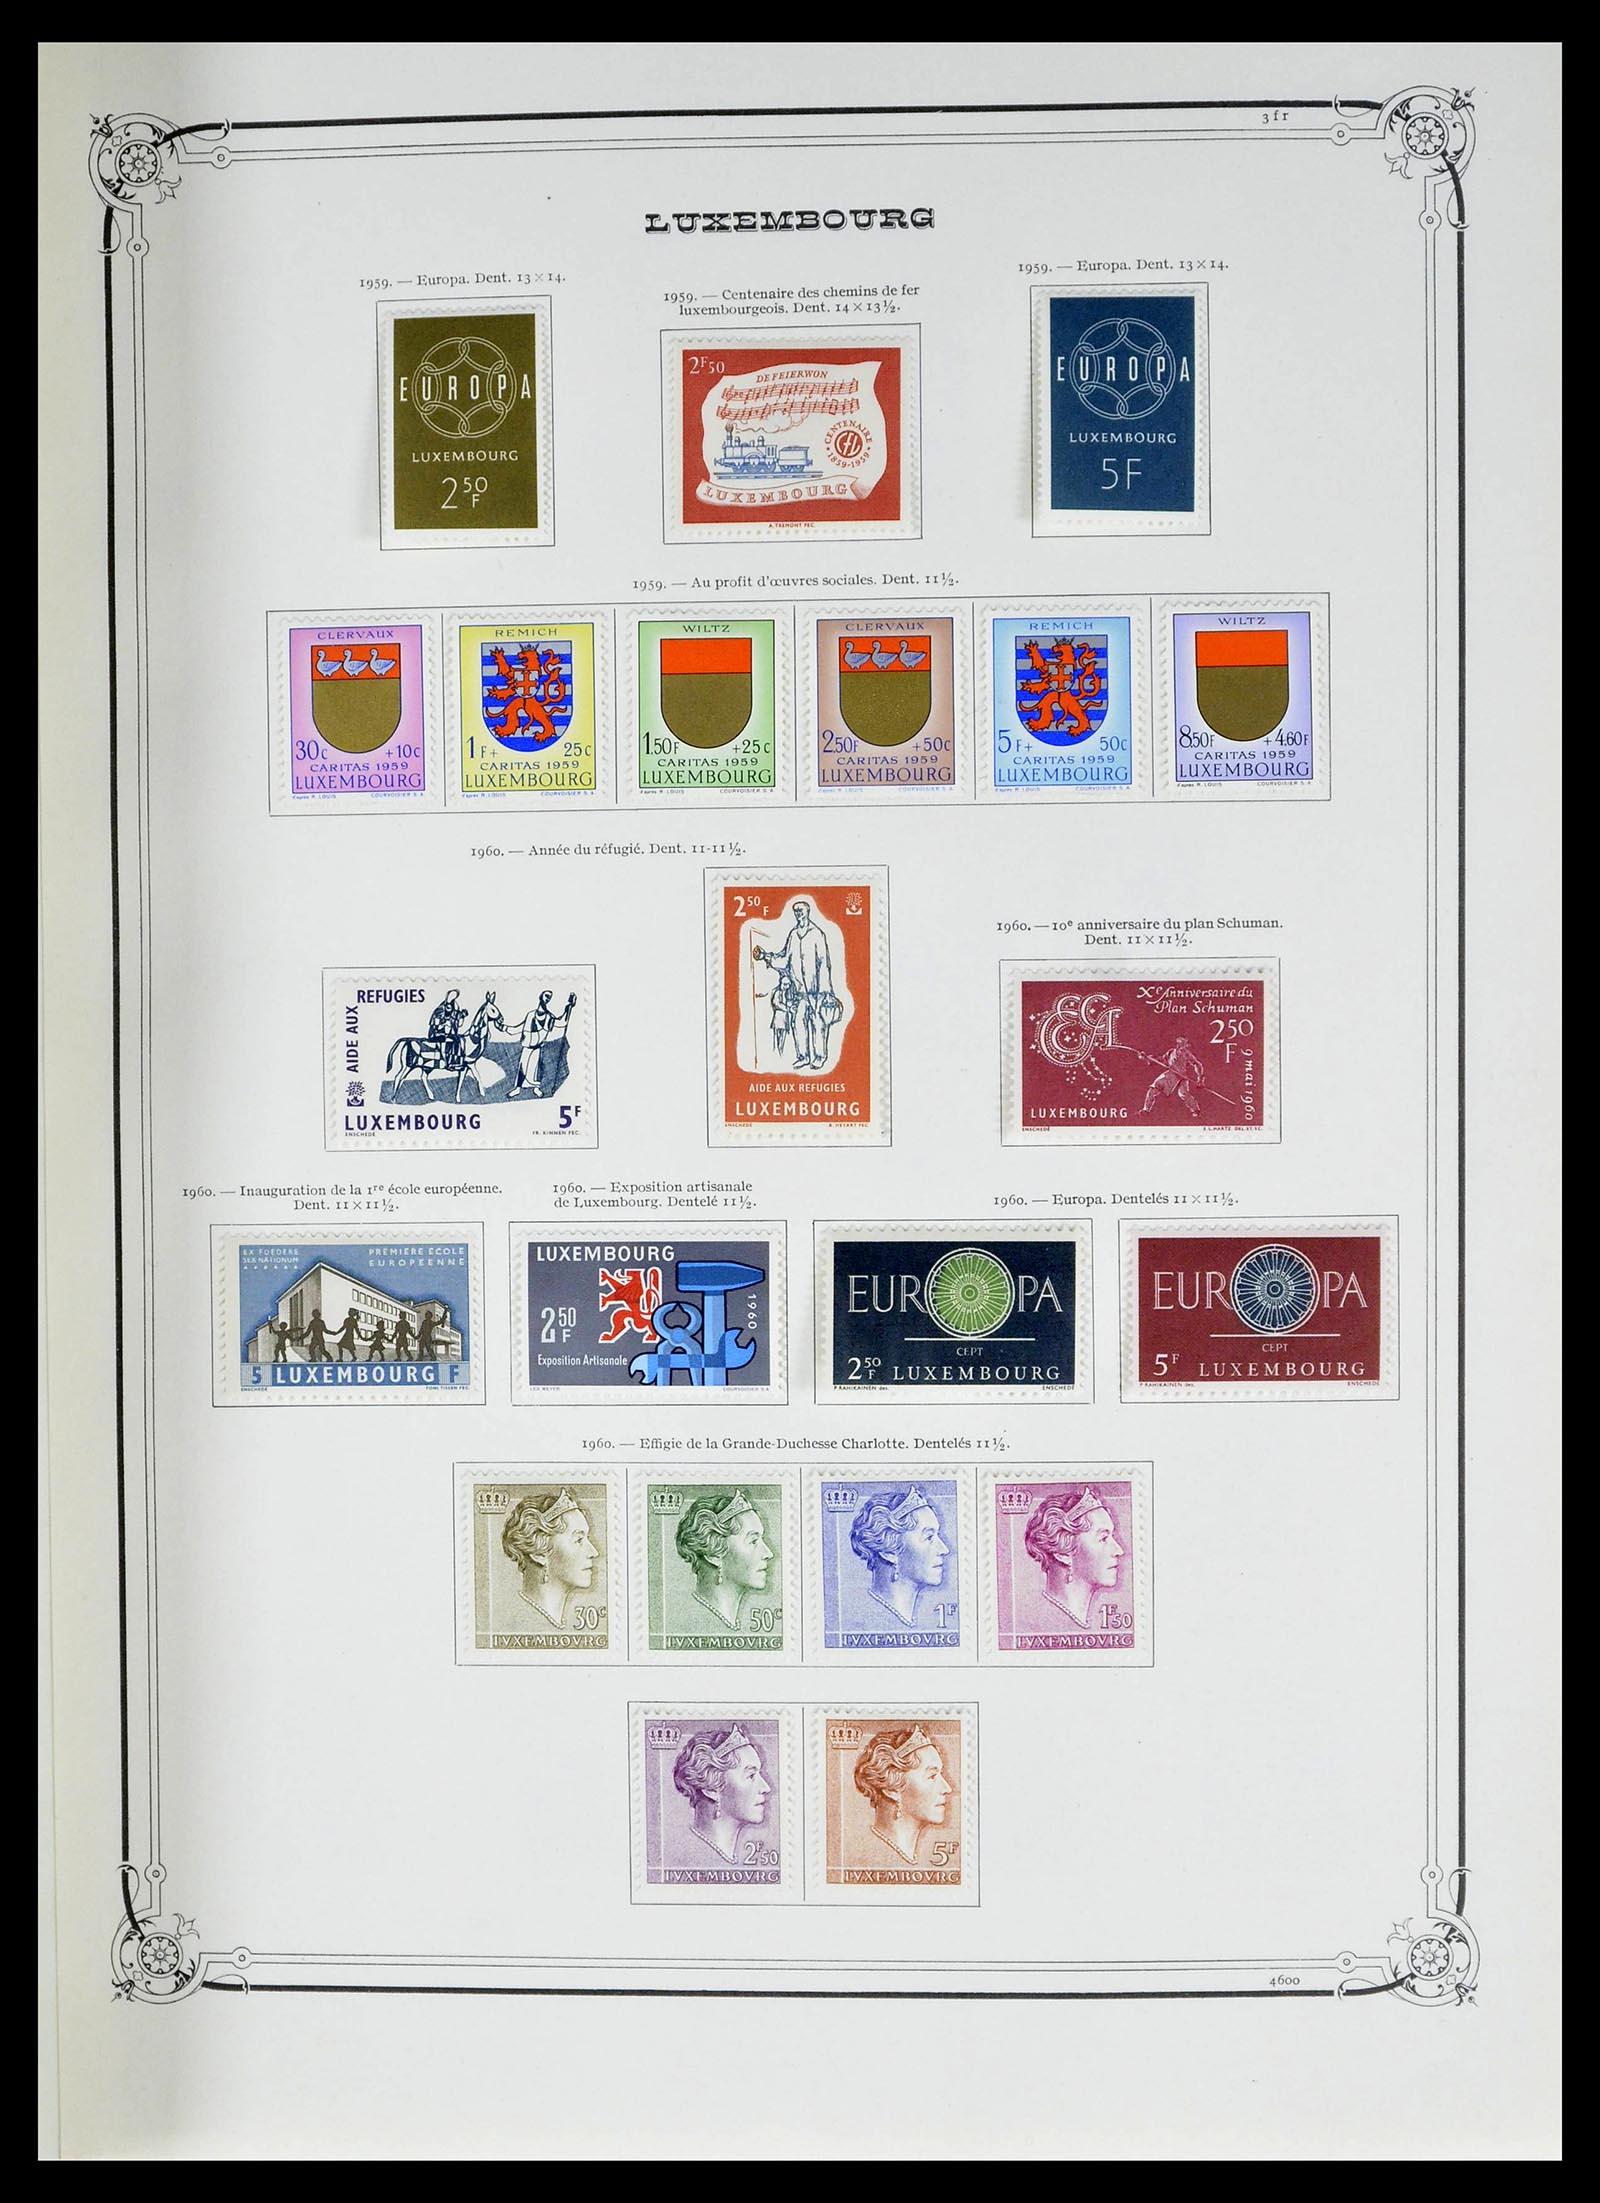 39142 0026 - Stamp collection 39142 Luxembourg 1852-1991.